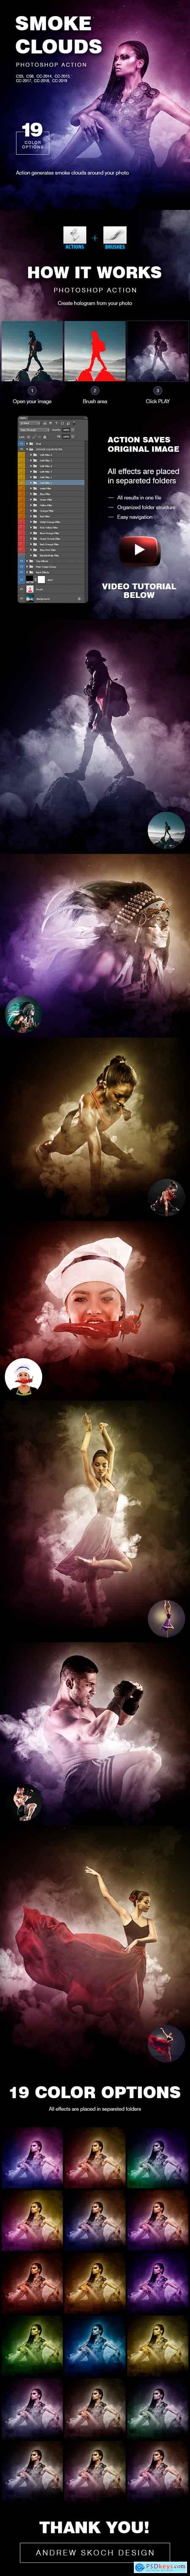 Graphicriver Smoke Clouds Photoshop Action